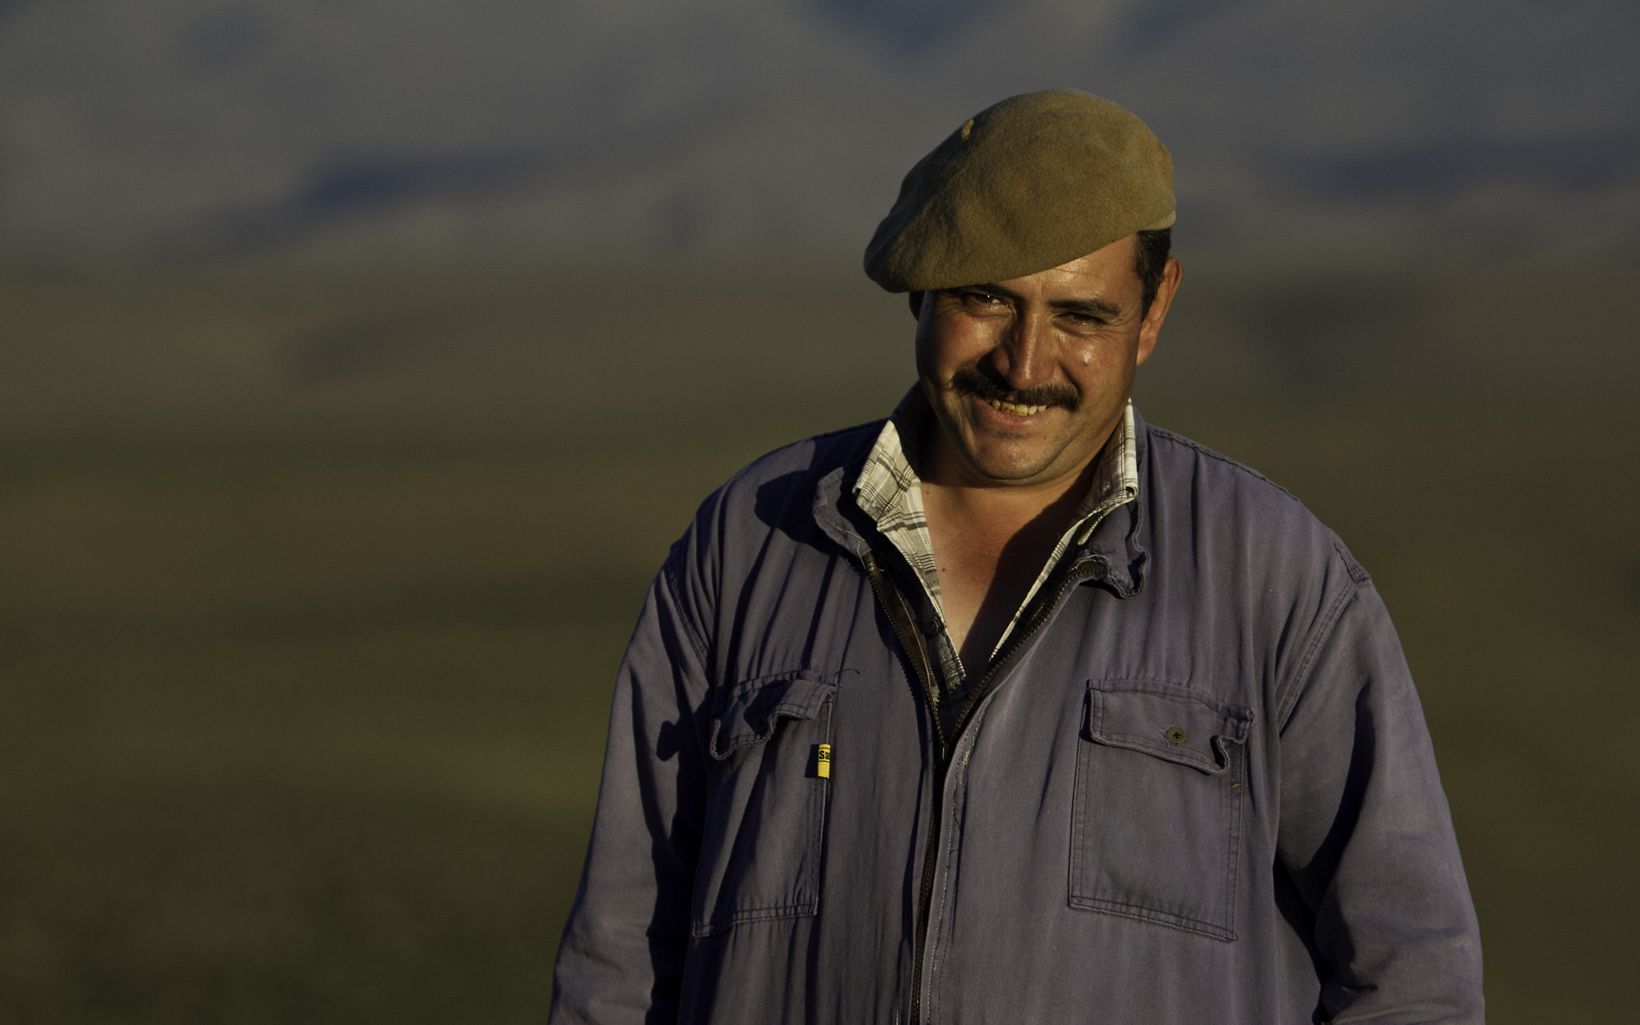 Goucho at a merino sheep ranch under Ovis XXI management in the Patagonian Steppe ecoregion of Argentina’s Neuquén Province. The Conservancy is working with Ovis XXI to protect Argentina’s temperate grasslands by promoting best practices in sustainable grazing in these fragile, arid grasslands. 